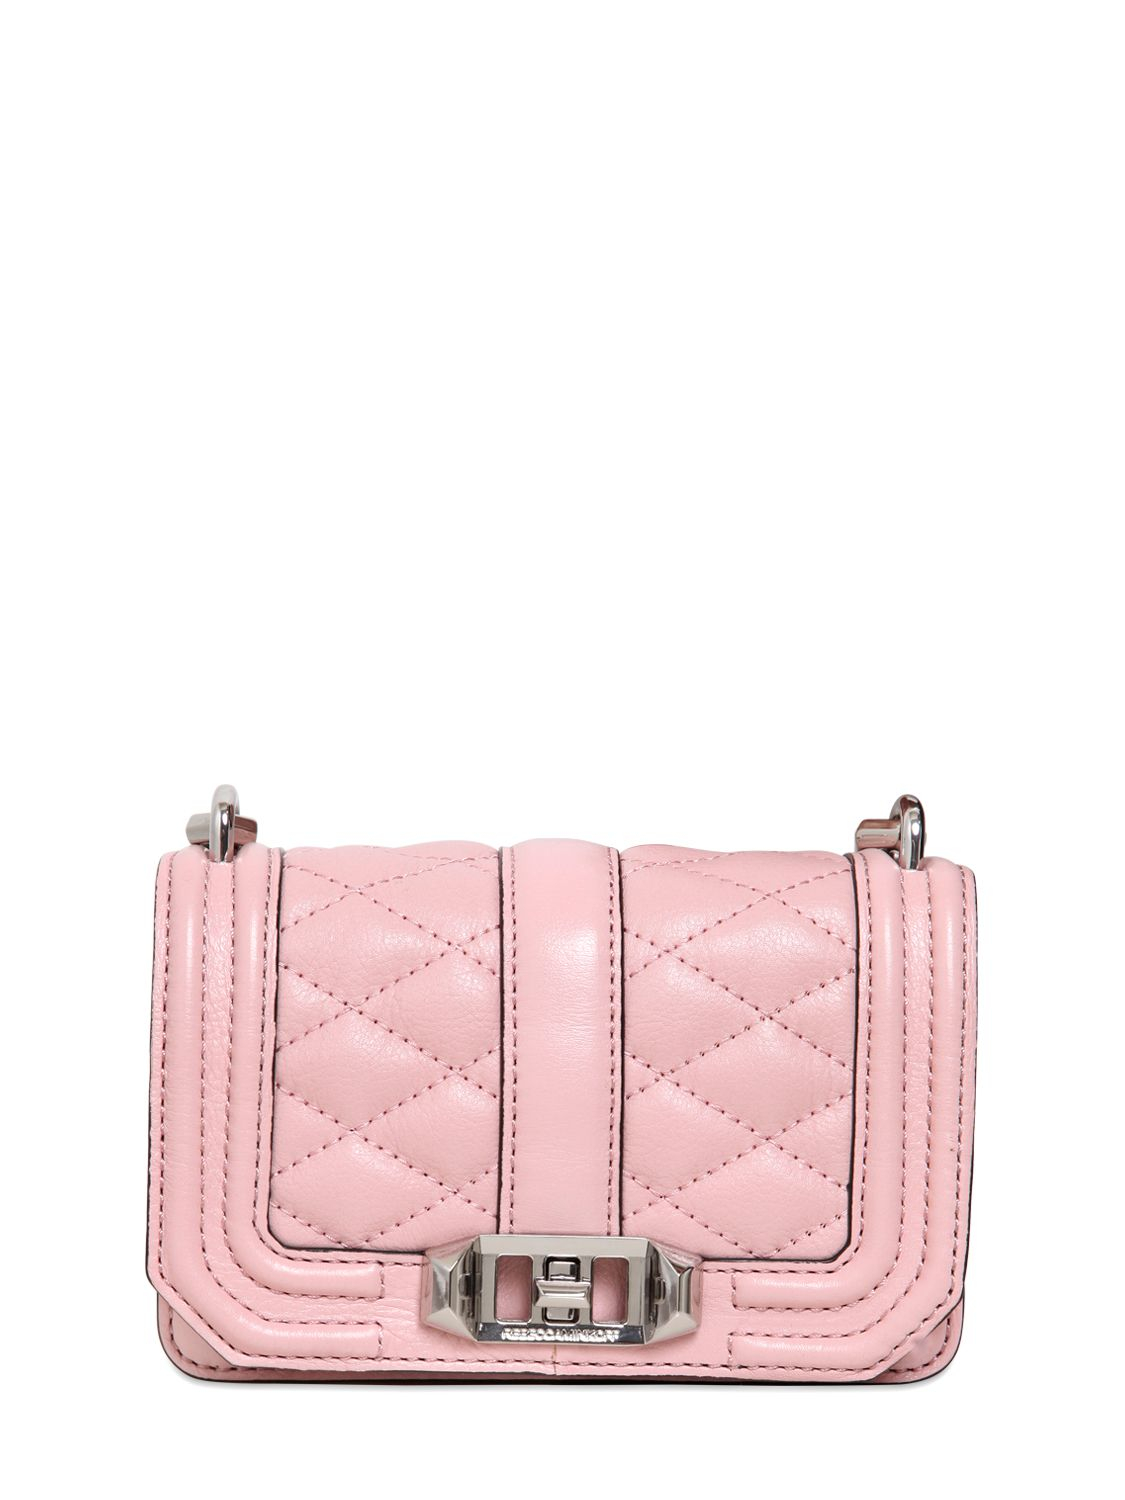 Lyst - Rebecca Minkoff Mini Love Quilted Leather Shoulder Bag in Pink